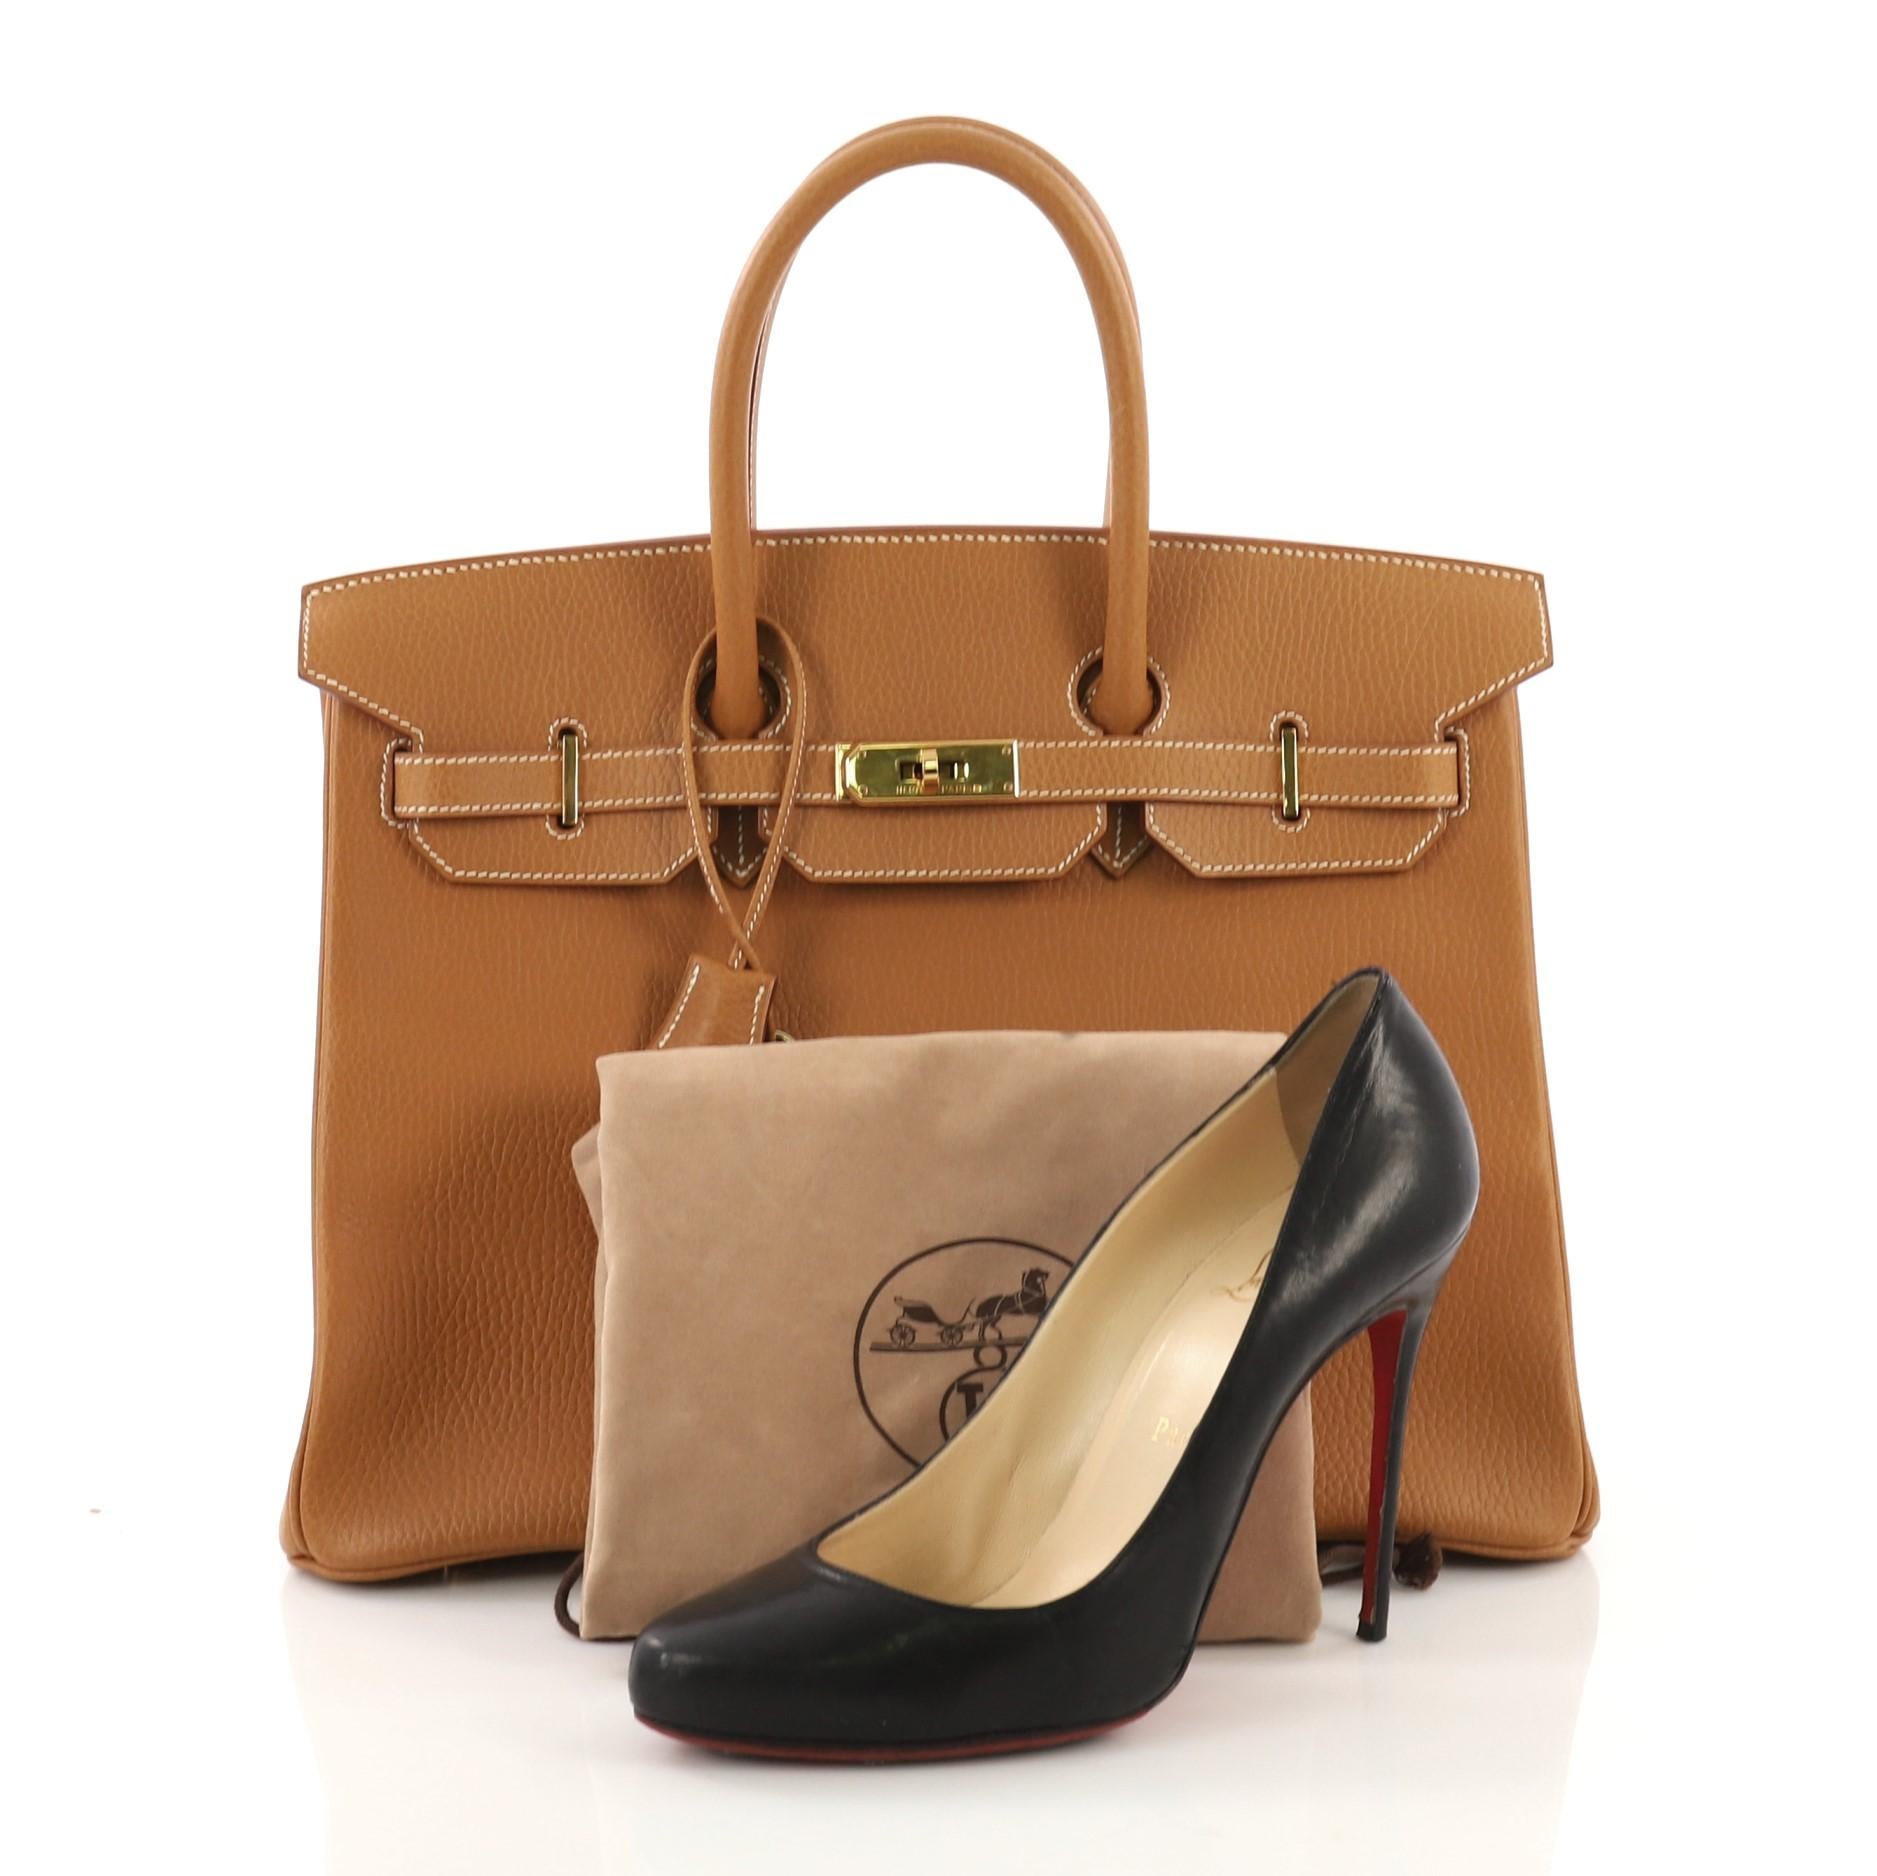 This Hermes Birkin Handbag Natural Ardennes with Gold Hardware 35, crafted in Natural brown Ardennes leather, features dual rolled handles, frontal flap, and gold hardware. Its turn-lock closure opens to a Natural brown Chevre leather interior with